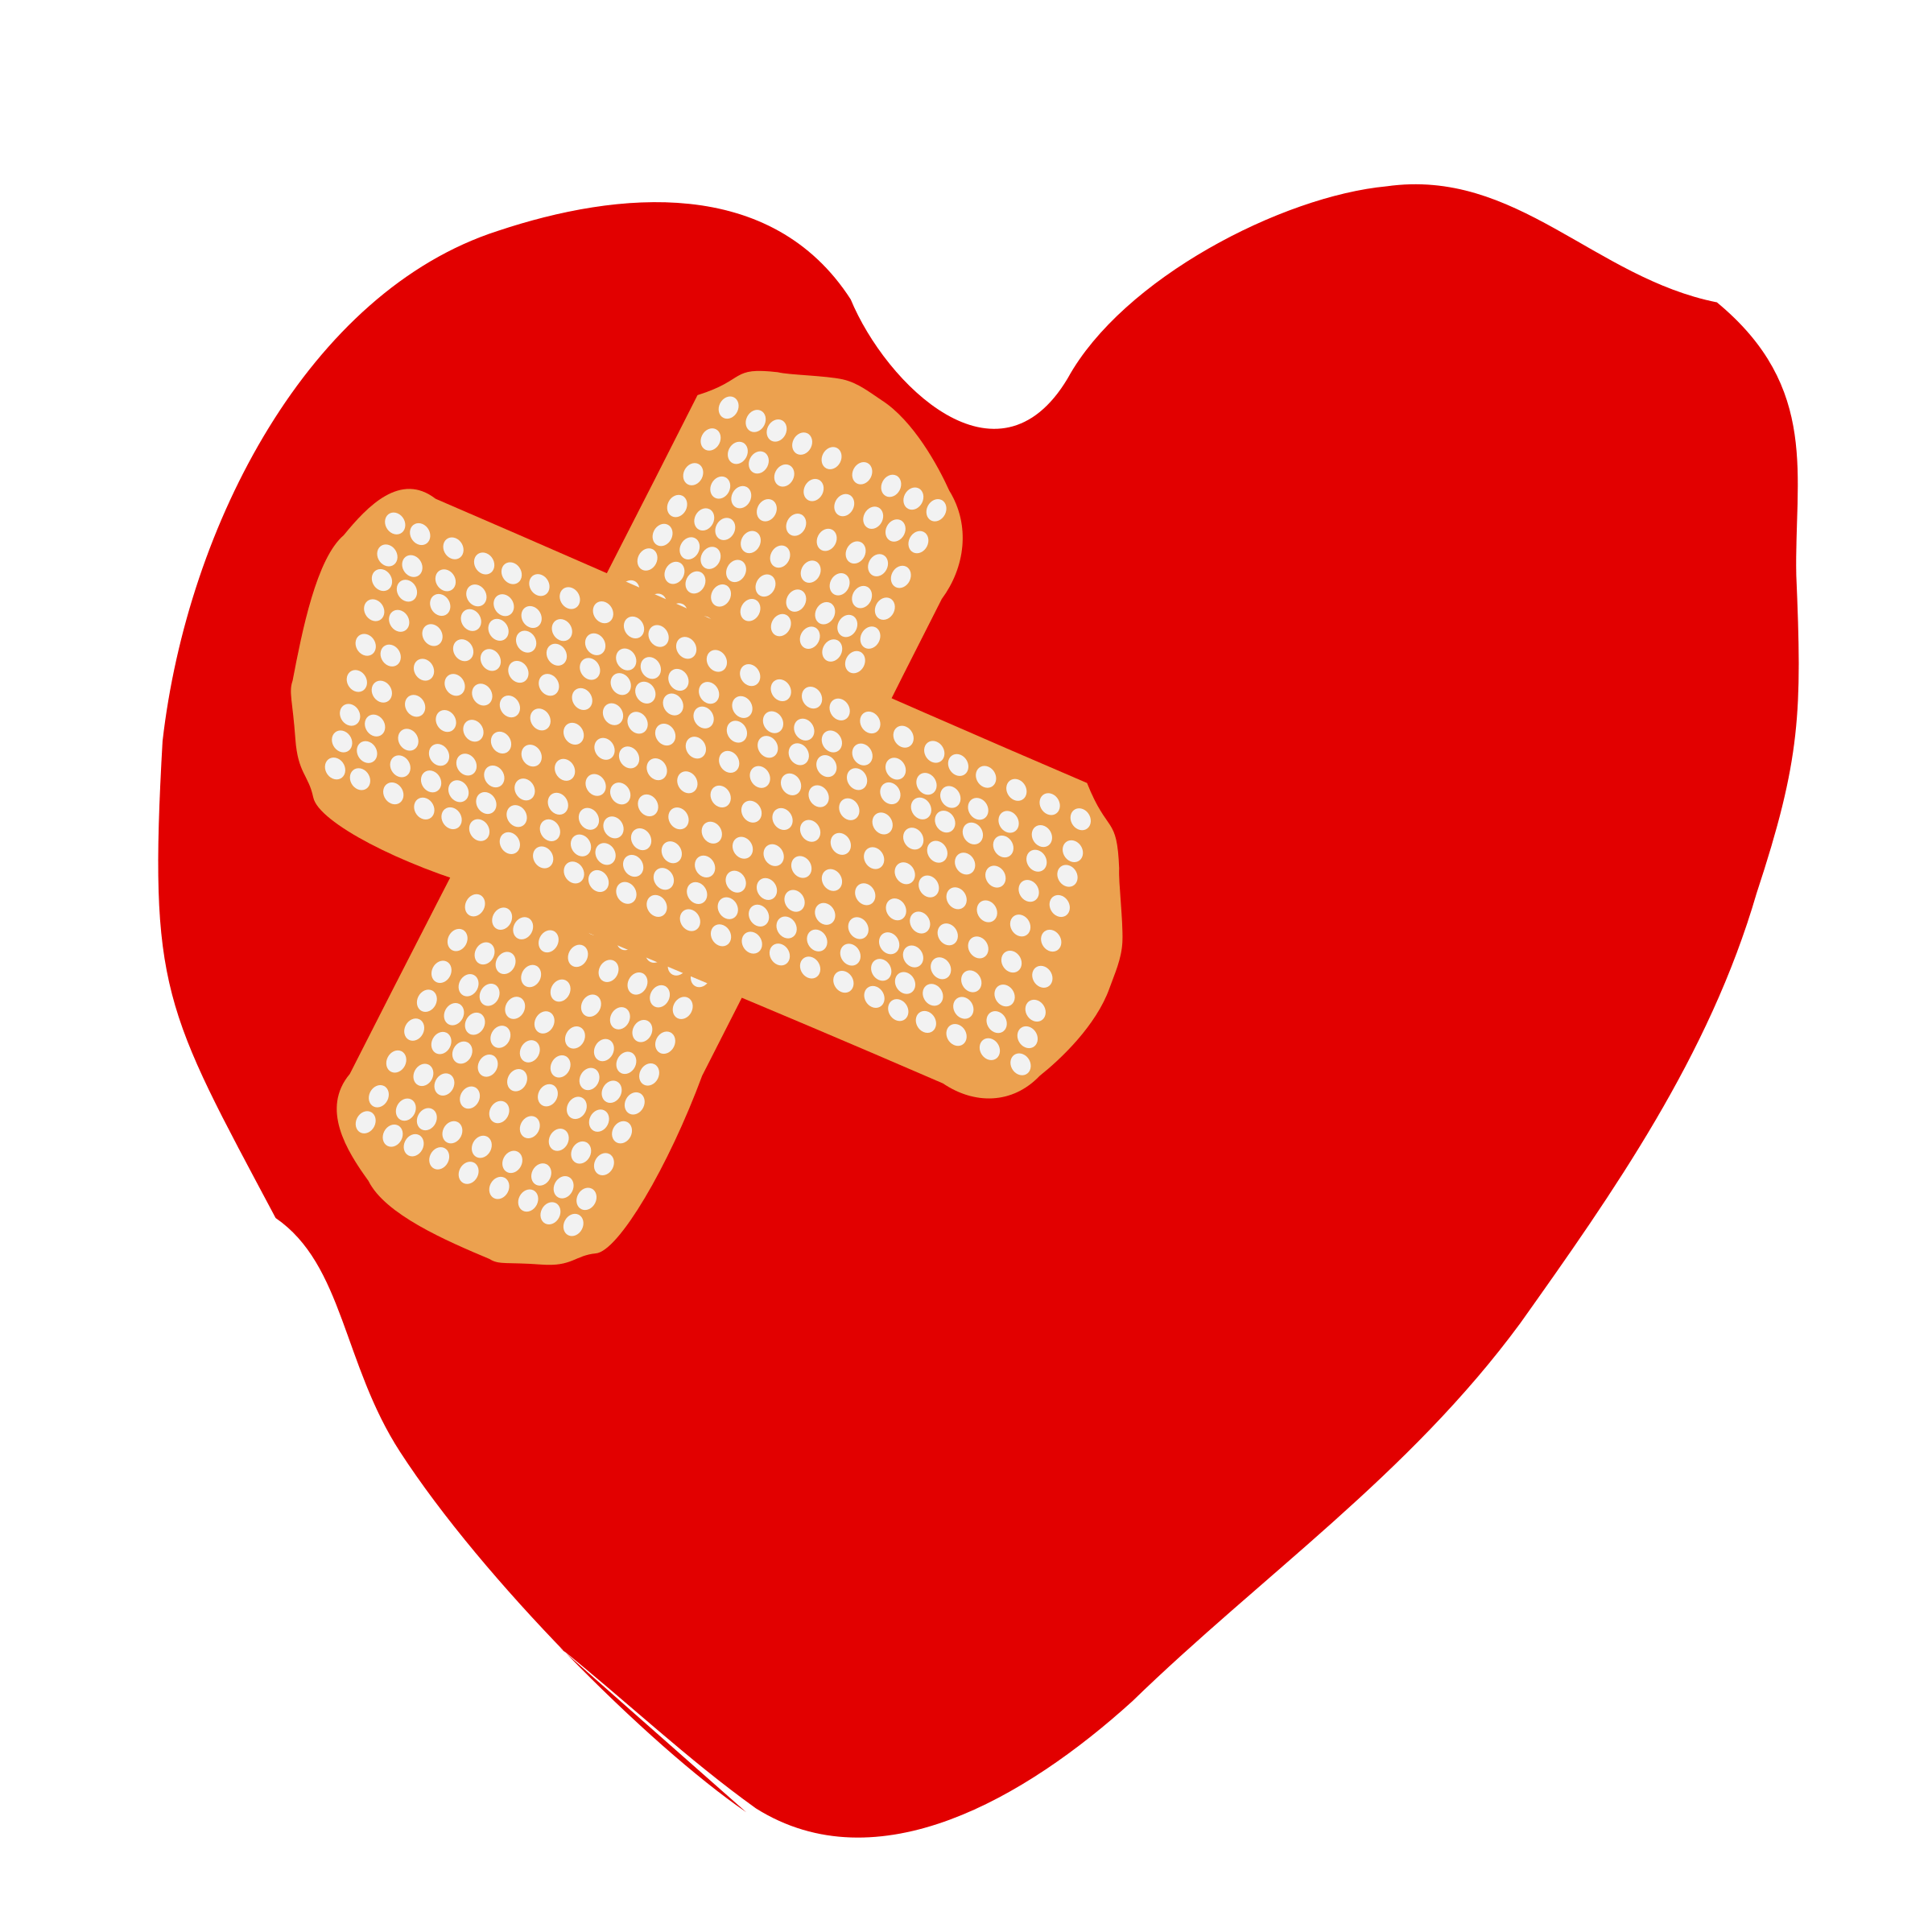 Returning to exercise and. Ekg clipart cardiology